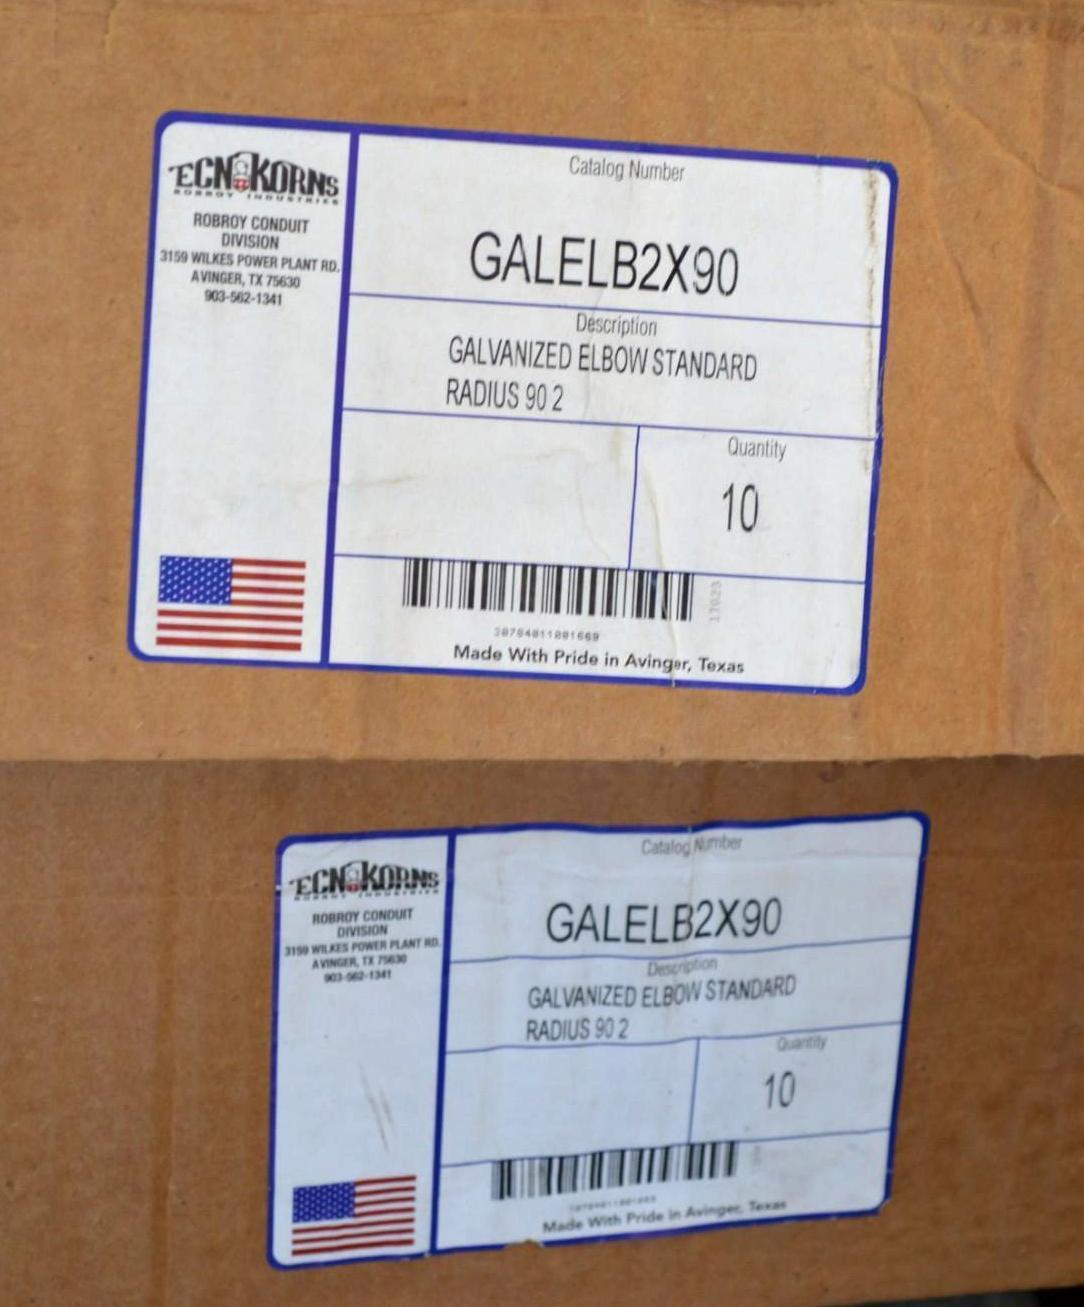 Pallet of Various Fittings - coated and galvanized elbows